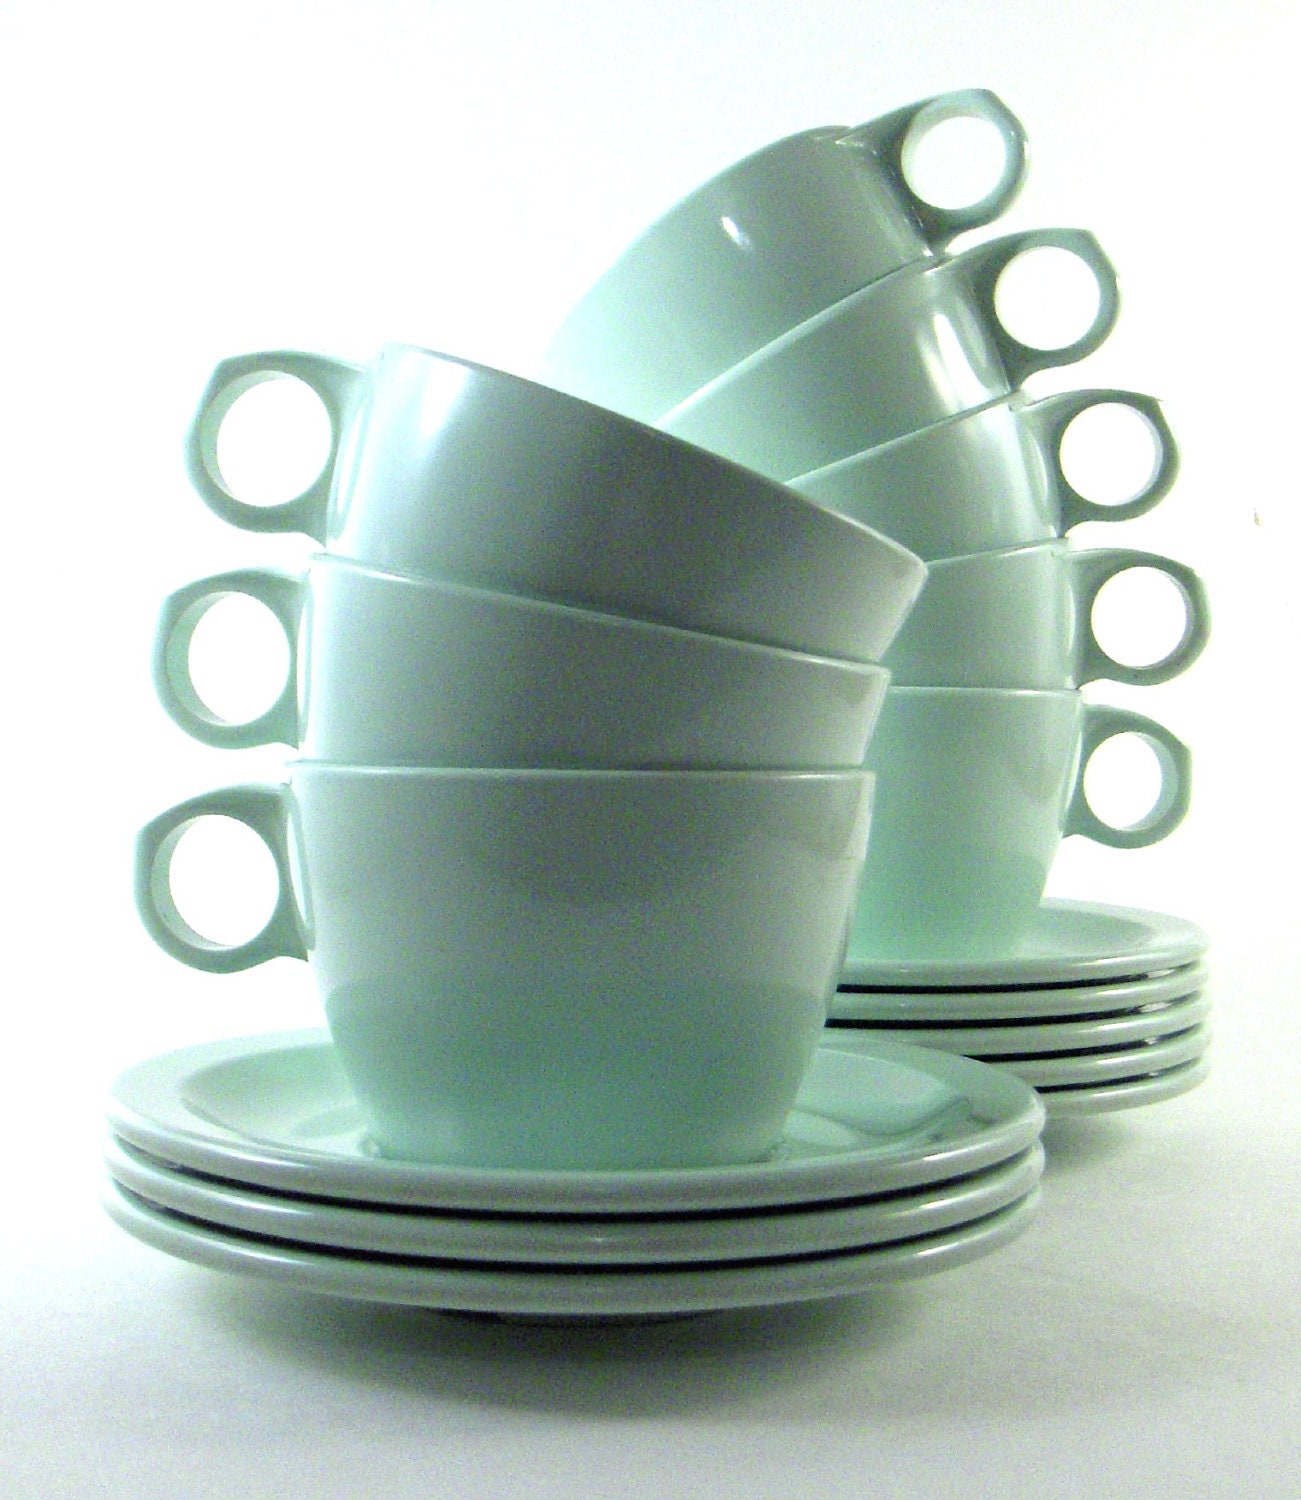 Vintage  etsy saucers ConvergedCommodities cups by and Green vintage Cups Texas Saucers Mint Ware